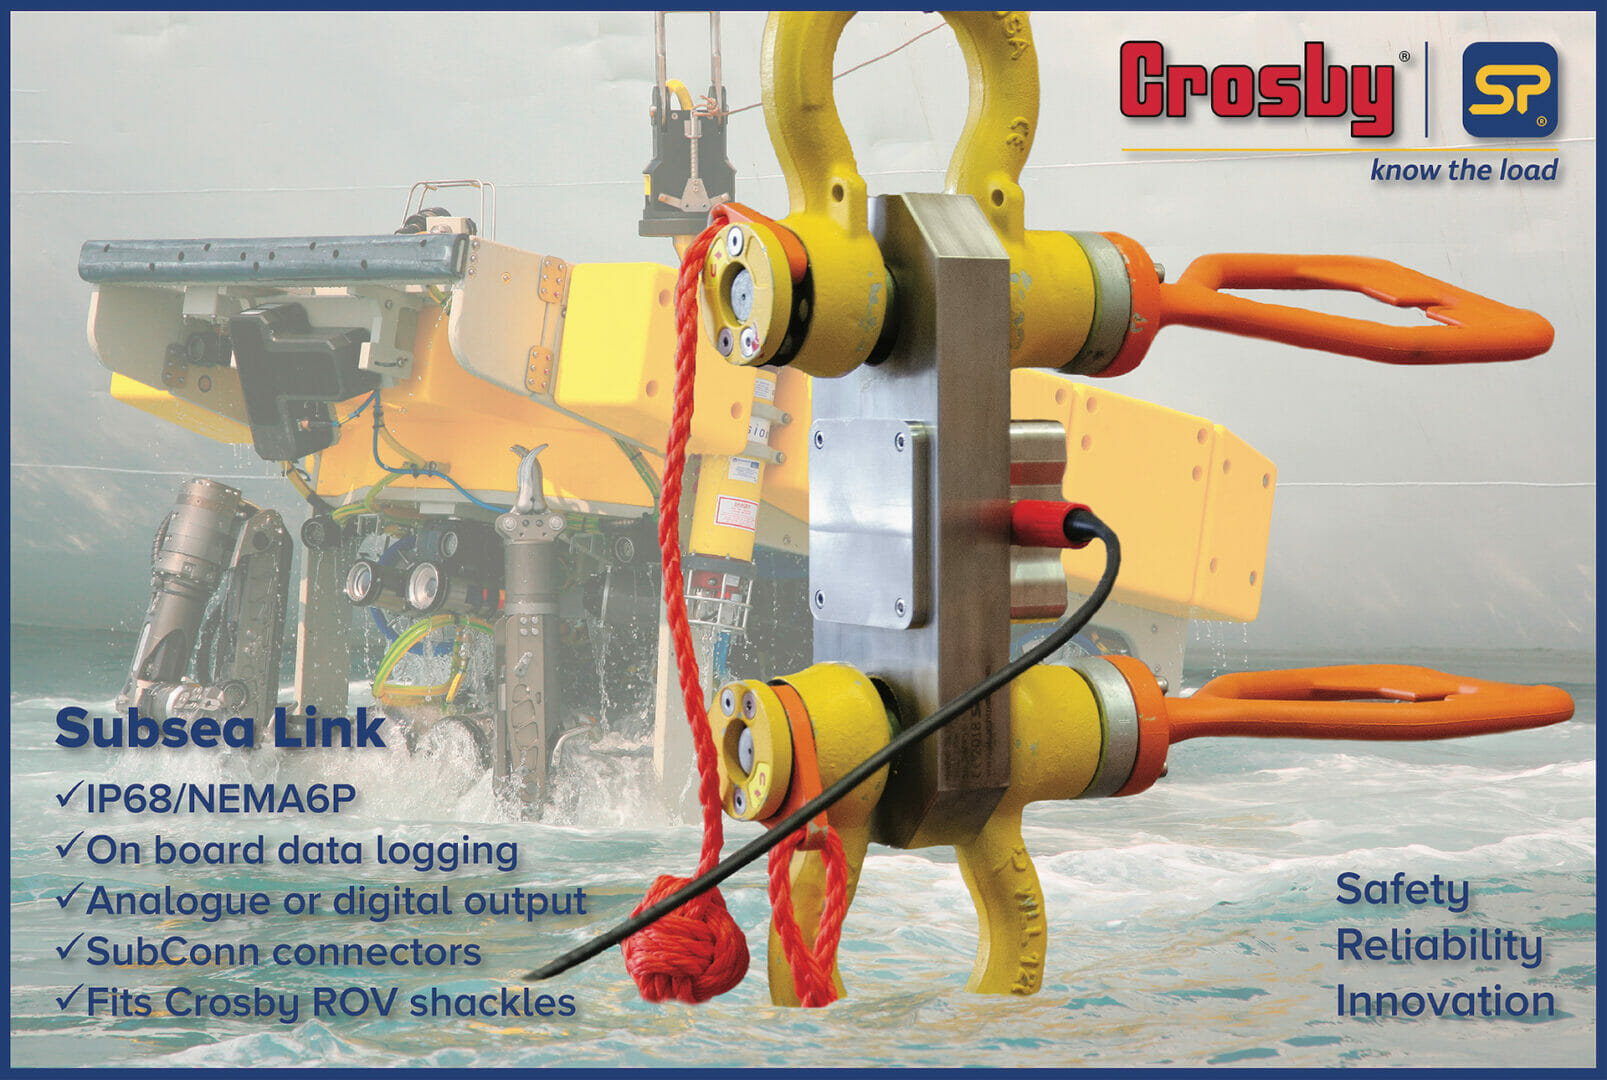 Straightpoint Launches Subsea Link @thecrosbygroup